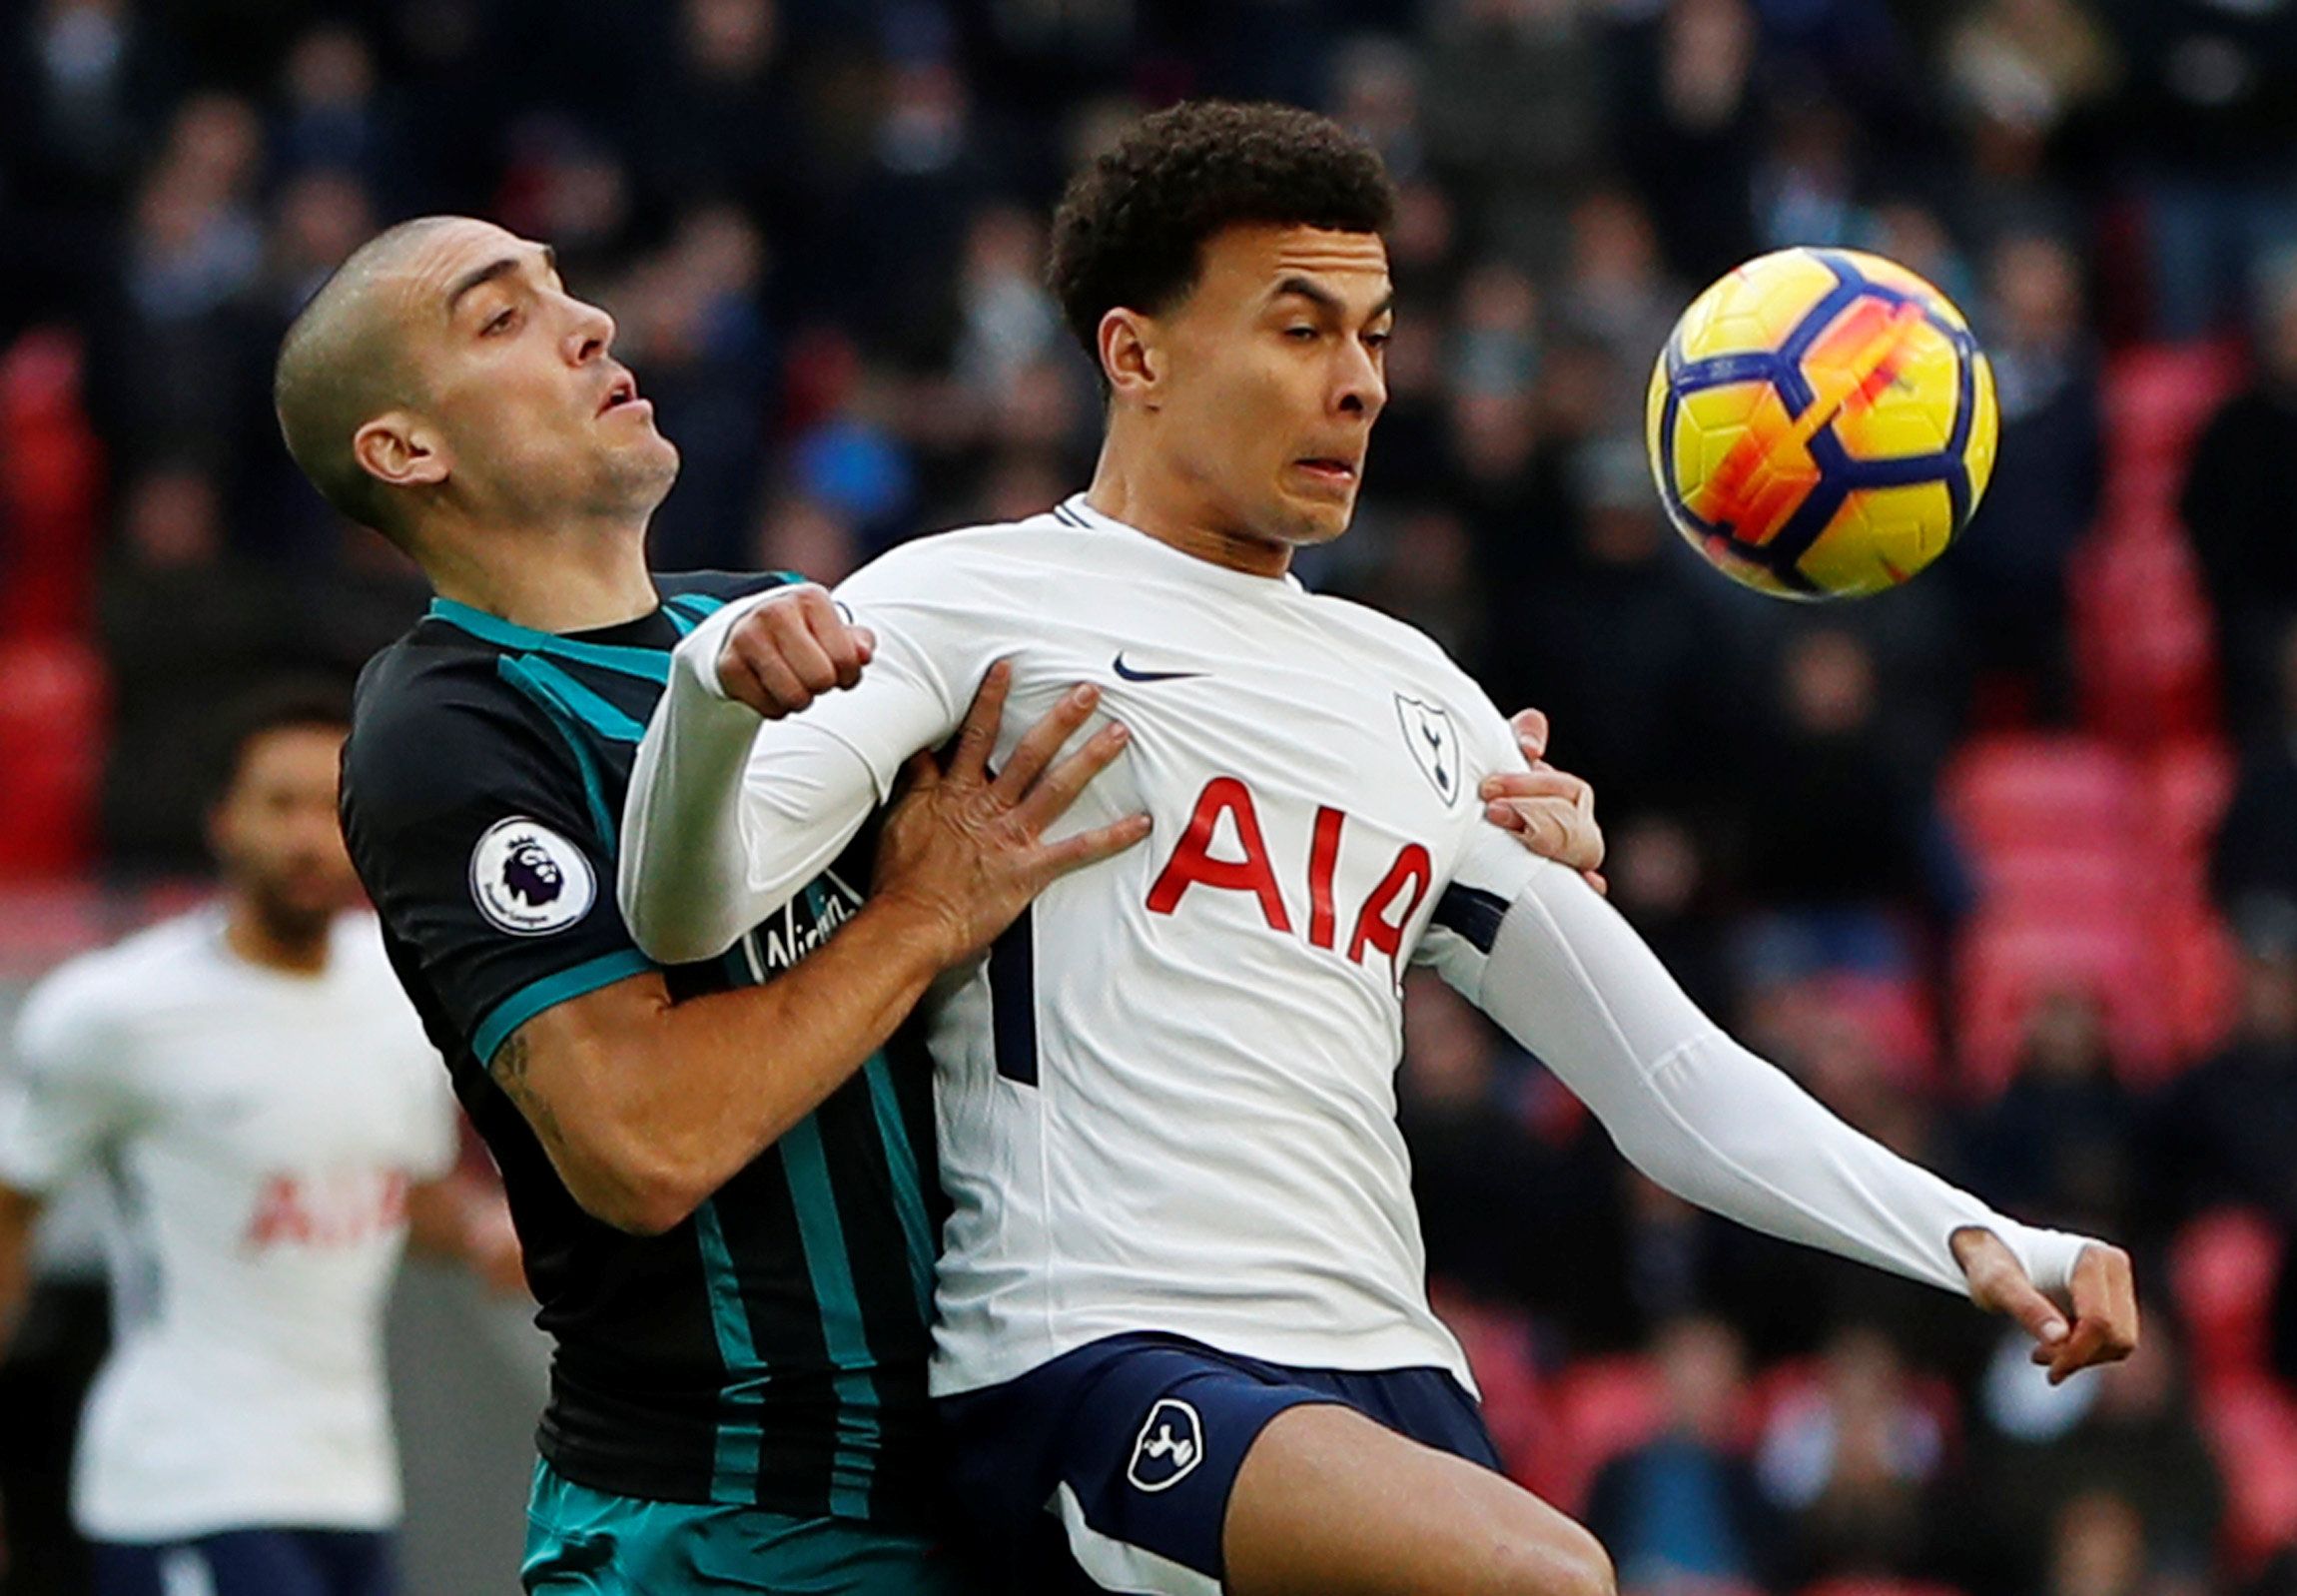 Soccer Football - Premier League - Tottenham Hotspur vs Southampton - Wembley Stadium, London, Britain - December 26, 2017   Tottenham's Dele Alli in action with Southampton's Oriol Romeu    Action Images via Reuters/Paul Childs    EDITORIAL USE ONLY. No use with unauthorized audio, video, data, fixture lists, club/league logos or 